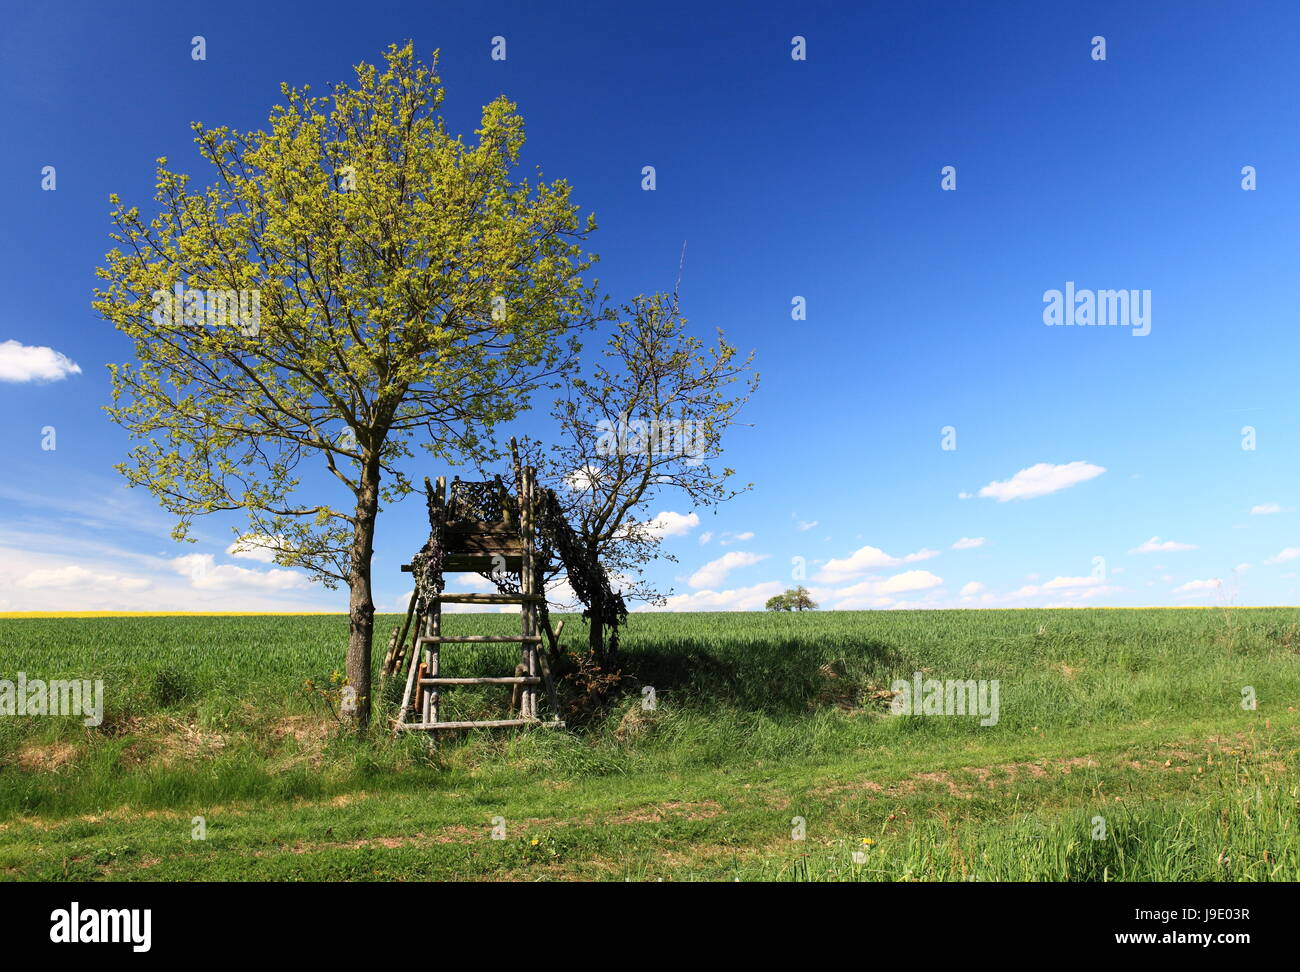 deerstand, scenery, countryside, nature, hunting, chase, forest, wait, waiting, Stock Photo